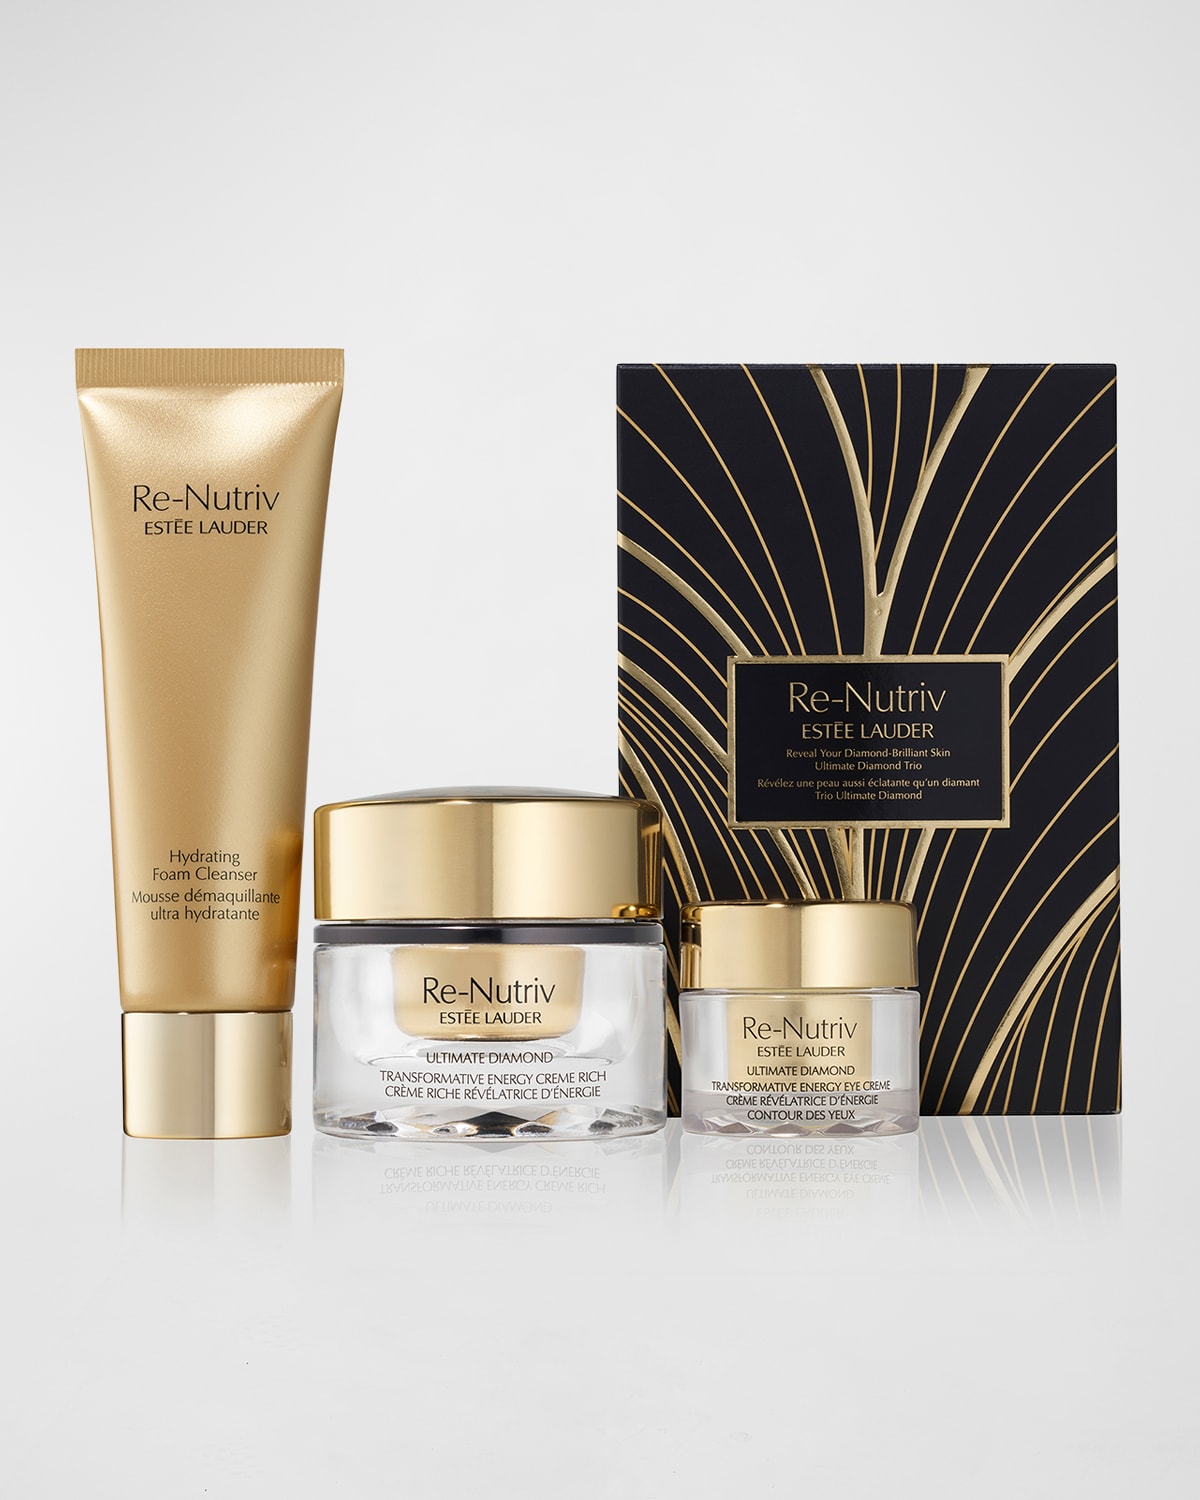 Re-Nutriv Diamond Gift Set, Yours with any $150 Estee Lauder Purchase